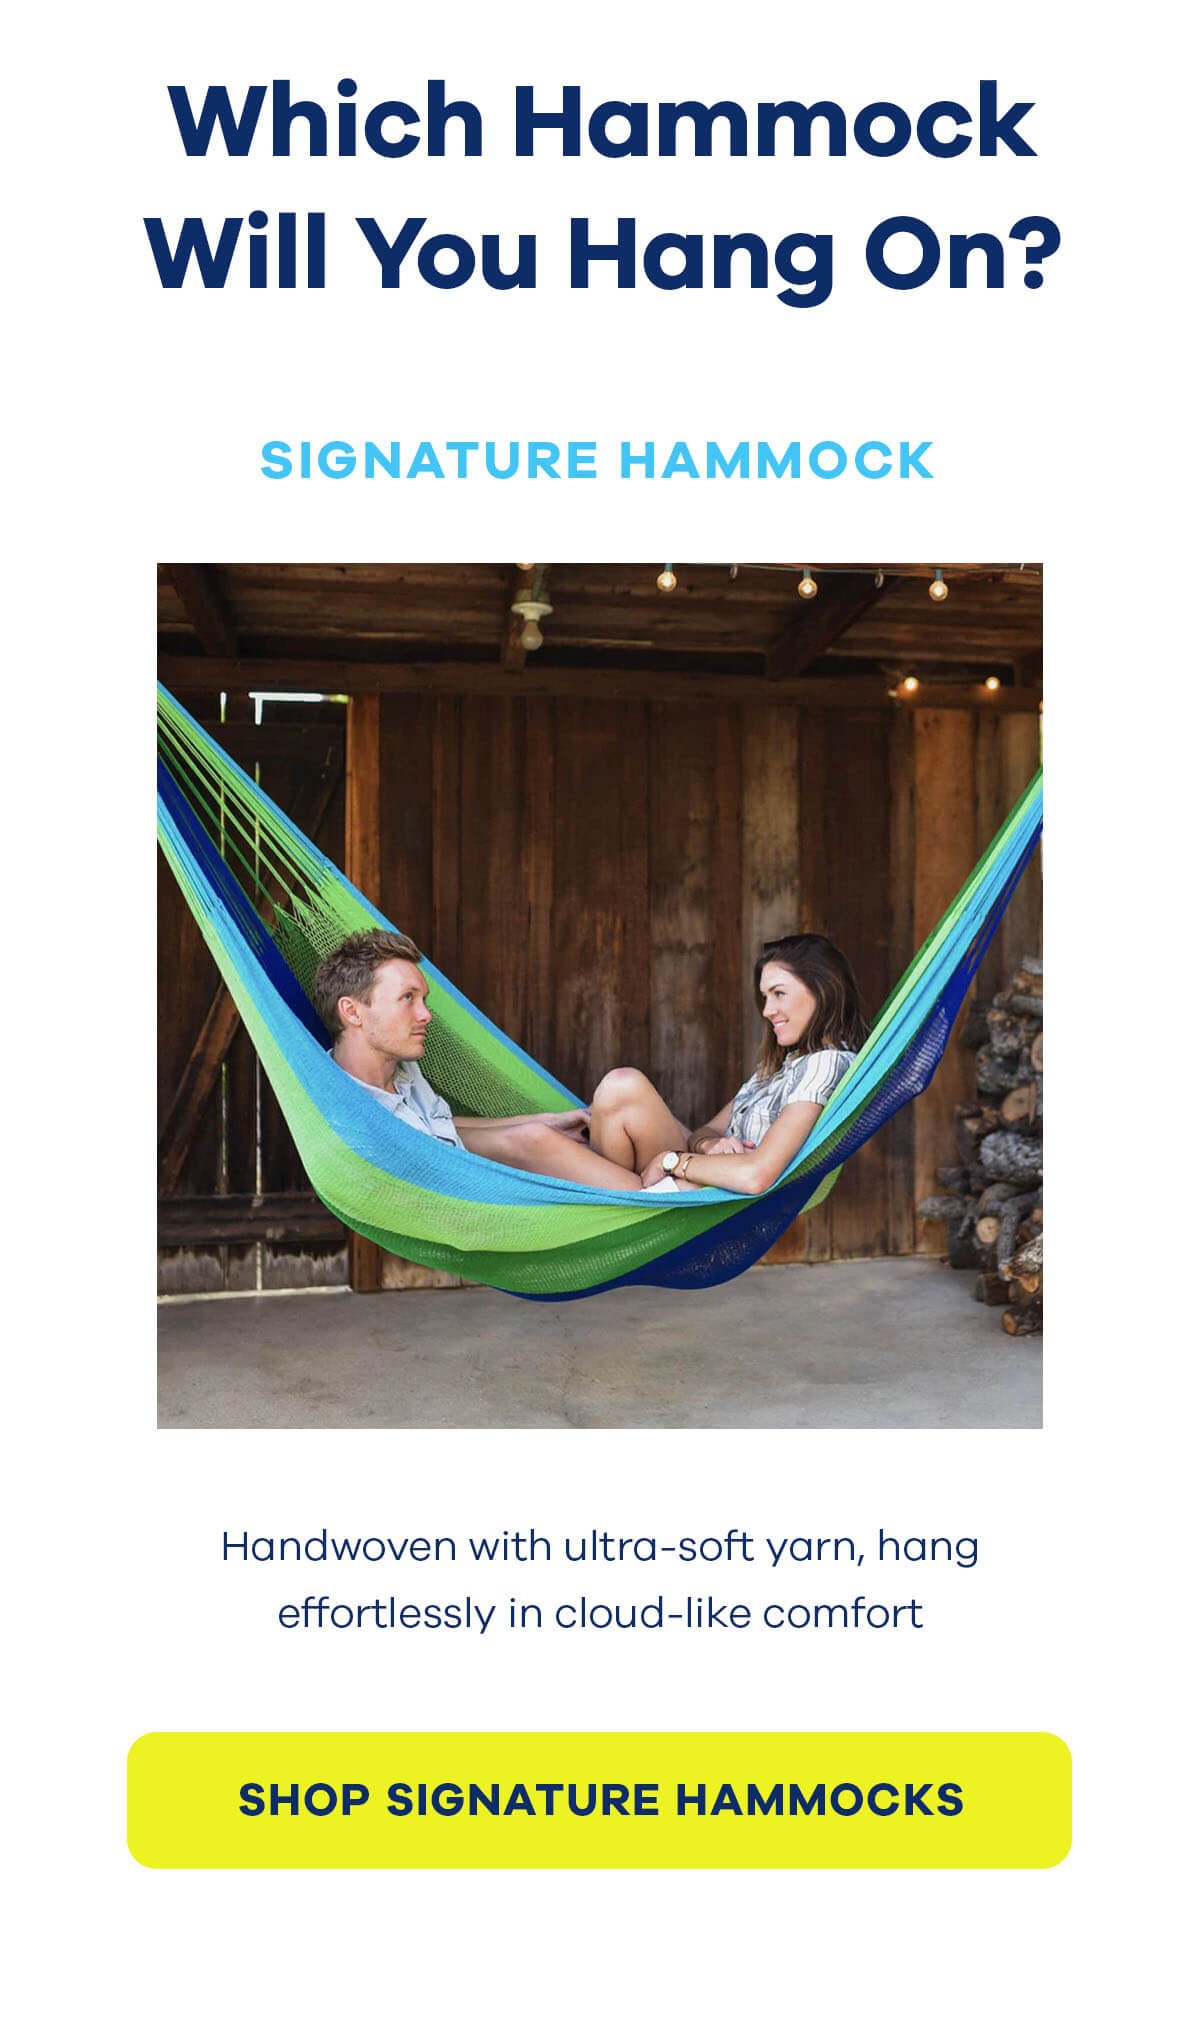 Which Hammock Will You Hang On? Signature Hammock Handwoven with ultra-soft yarn, hang effortlessly in cloud-like comfort SHOP SIGNATURE HAMMOCKS